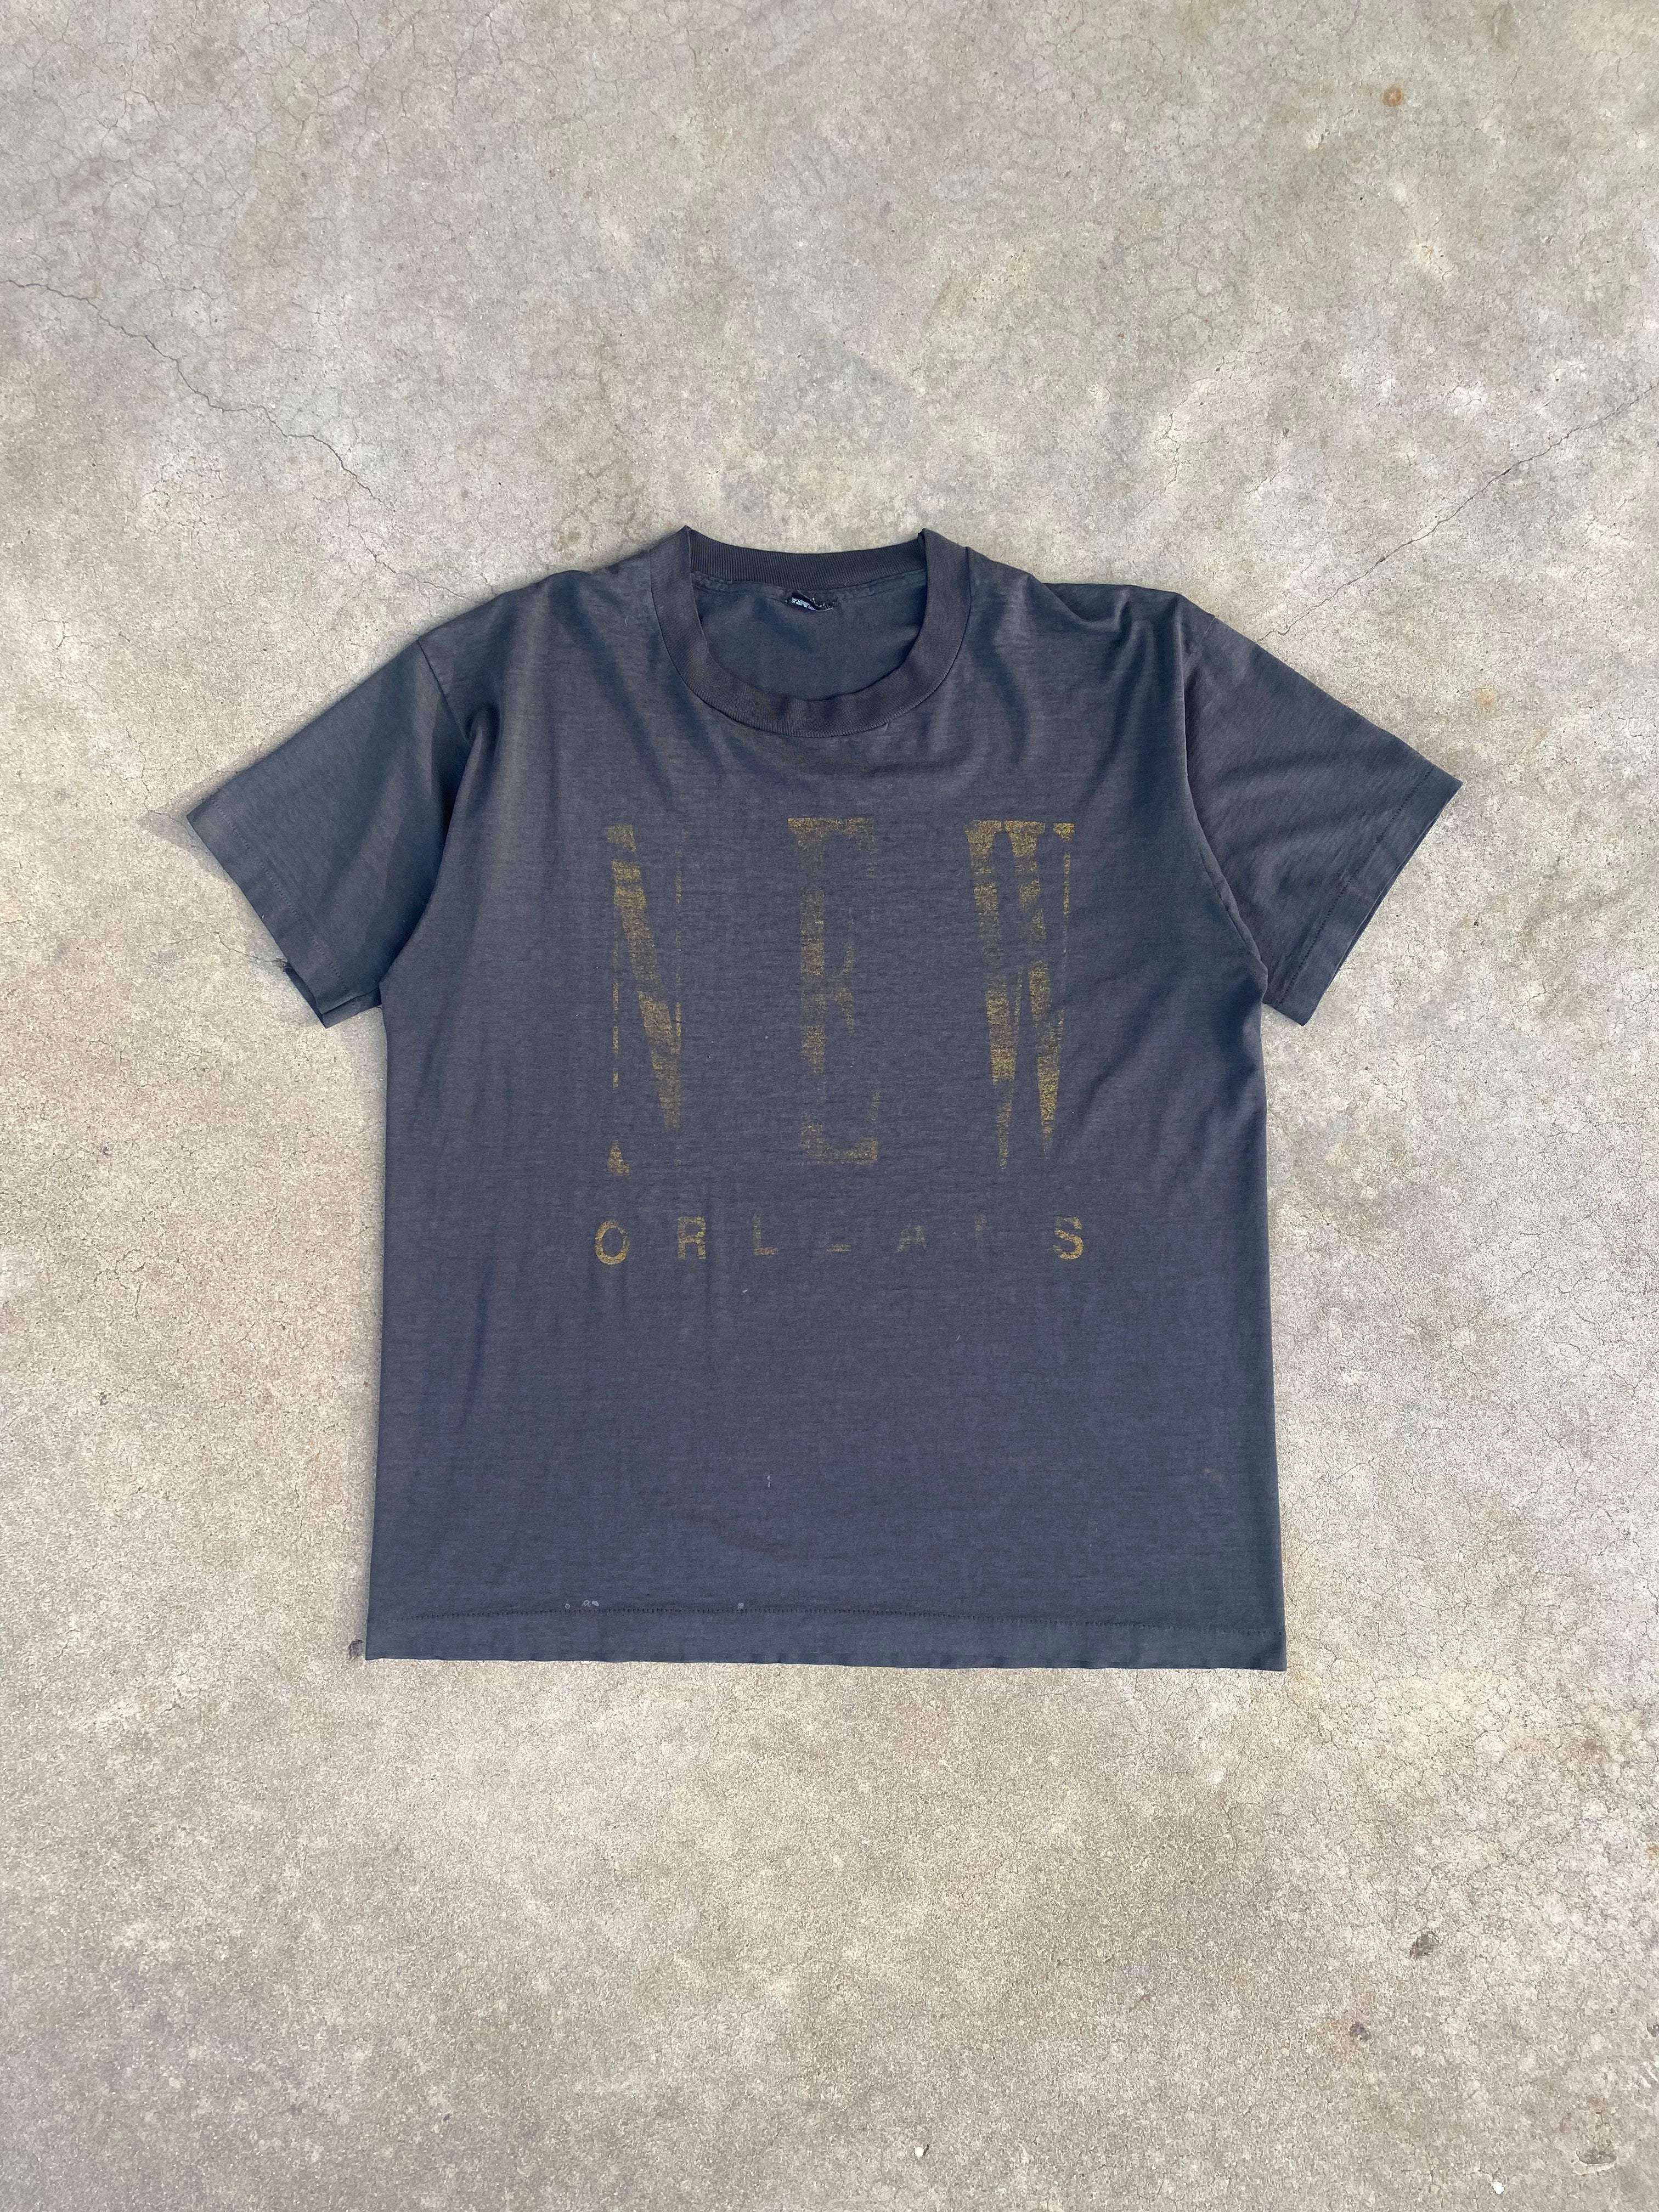 1990s New Orleans Faded T-Shirt (L)